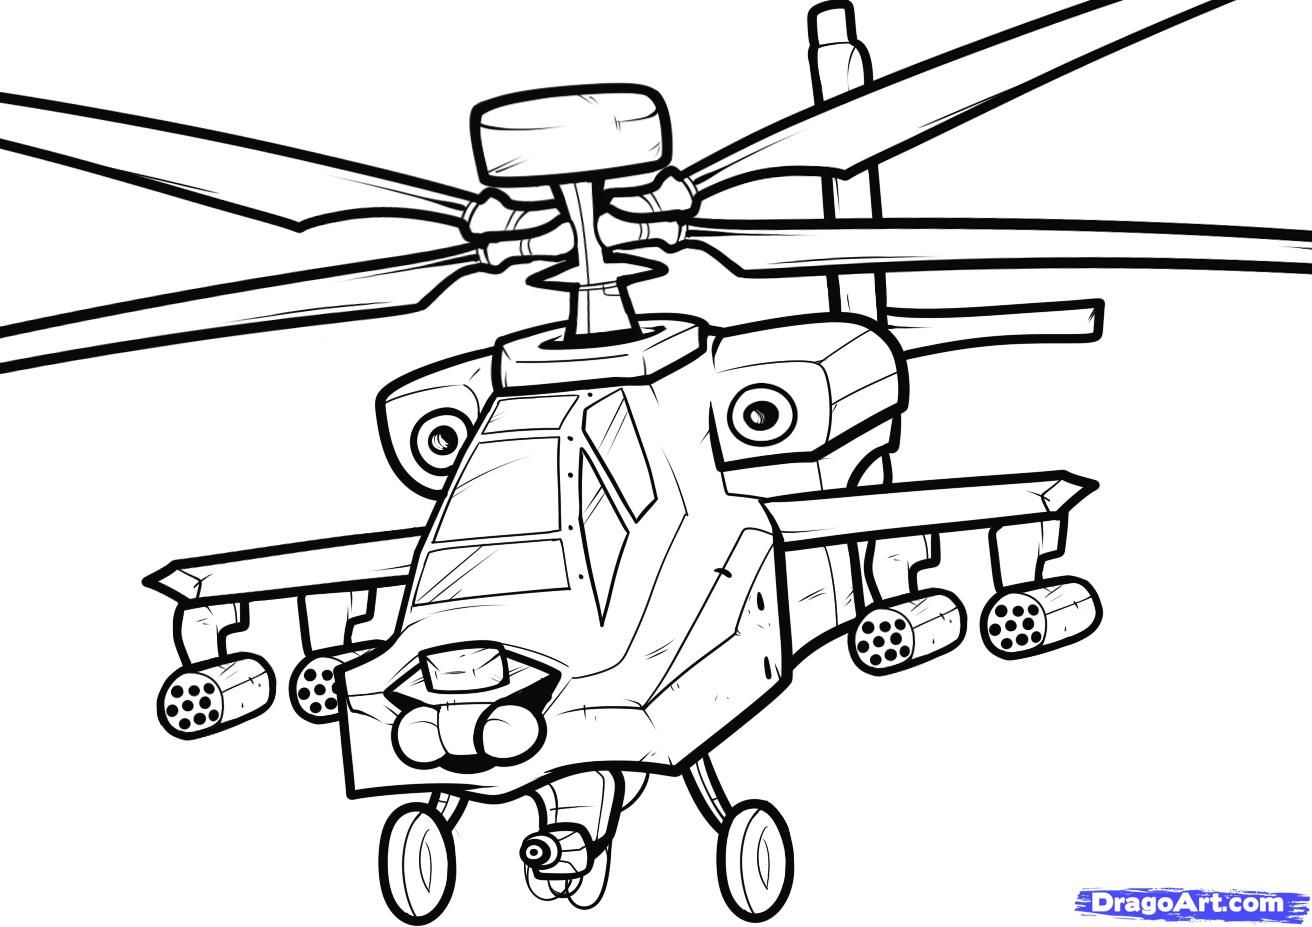 8 Pics of Army Girl Coloring Pages - GI Joe Coloring Pages, Army ...